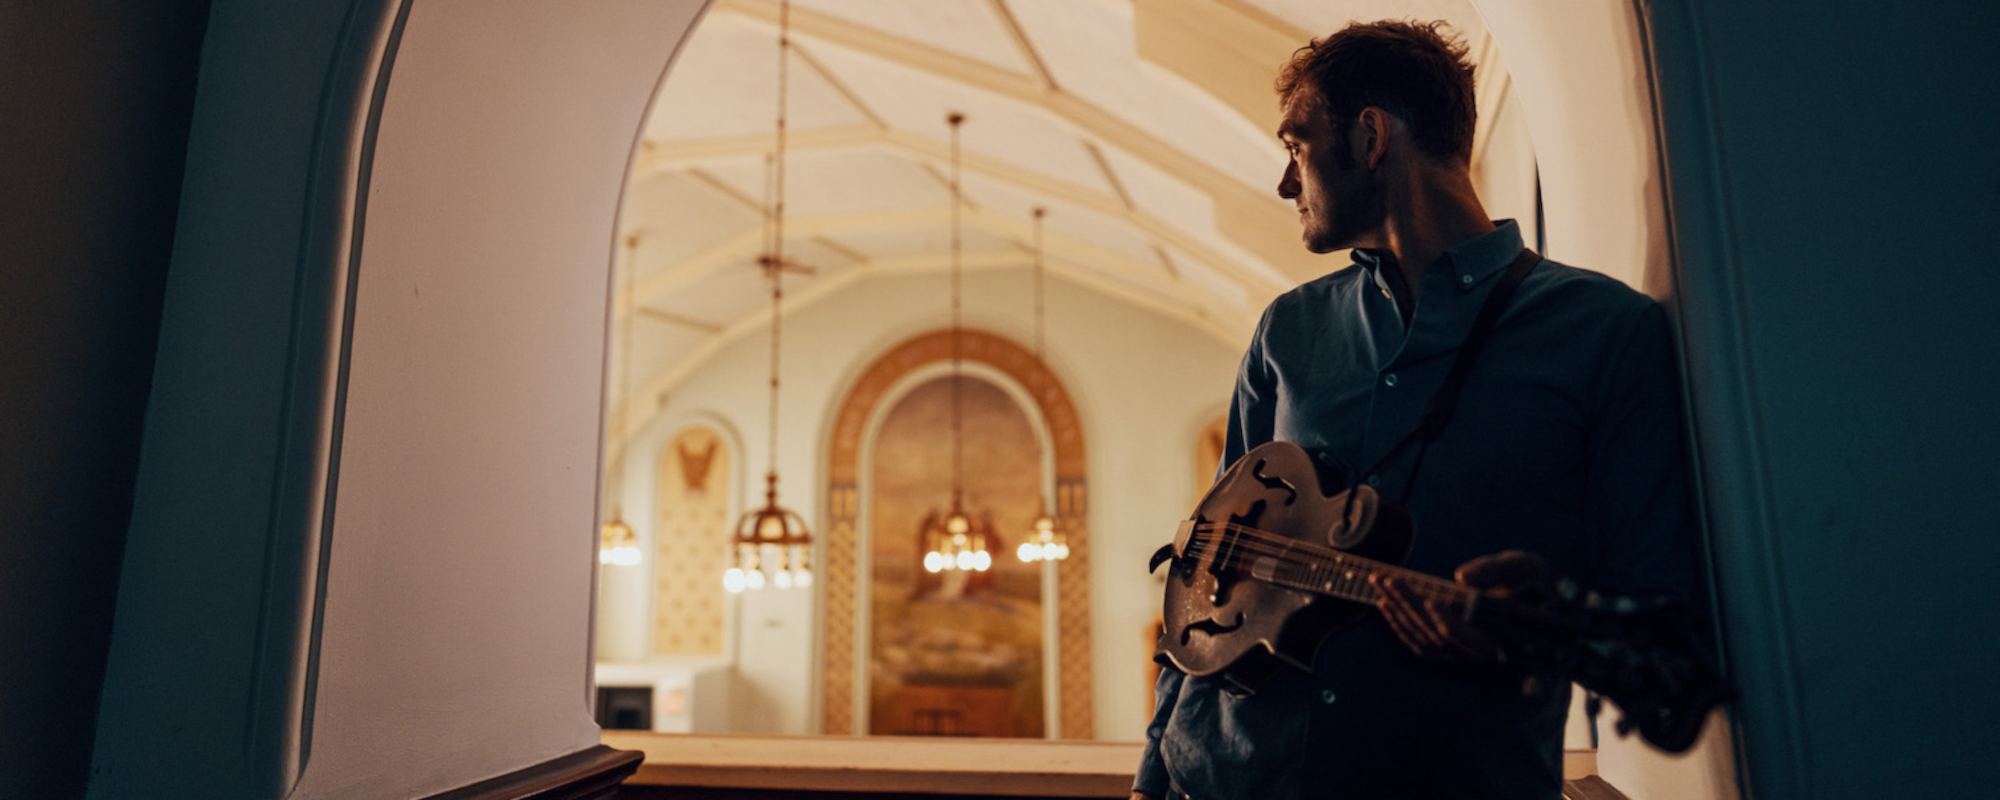 Chris Thile Examines His Christian Roots on New Album ‘Laysongs’